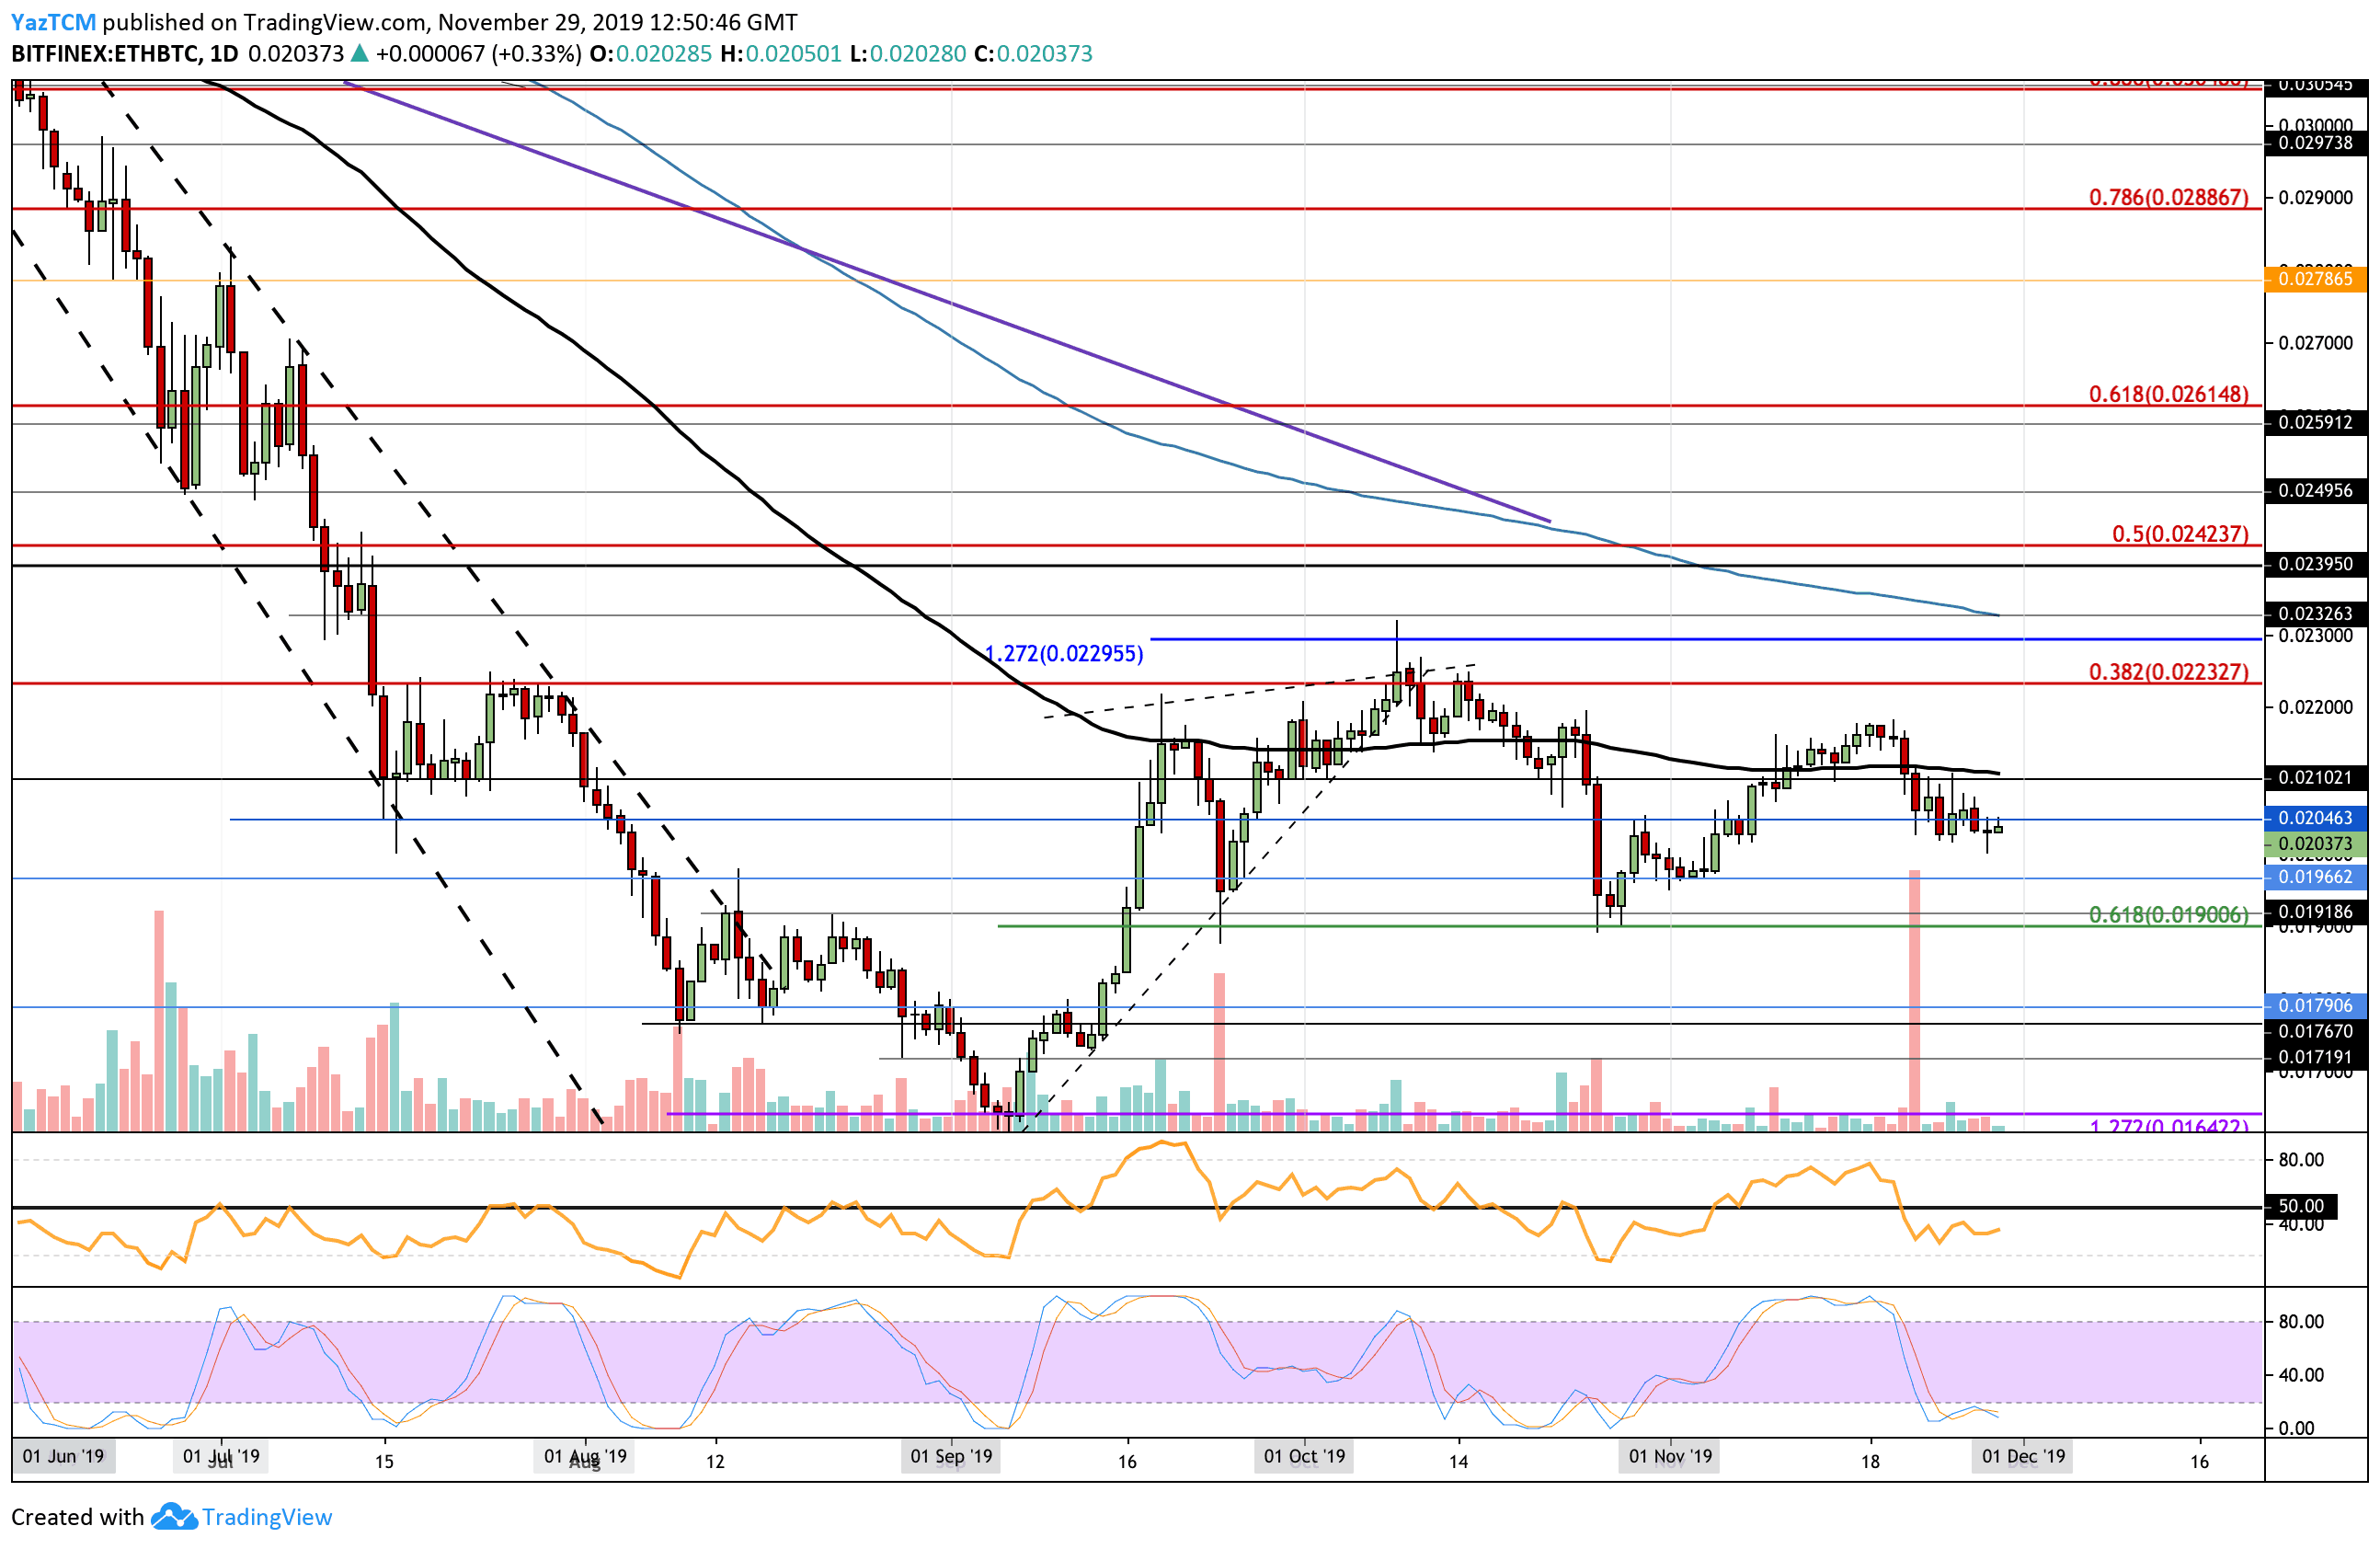 Crypto Price Analysis & Overview November 29: Bitcoin, Ethereum, Ripple, Tron, and Matic